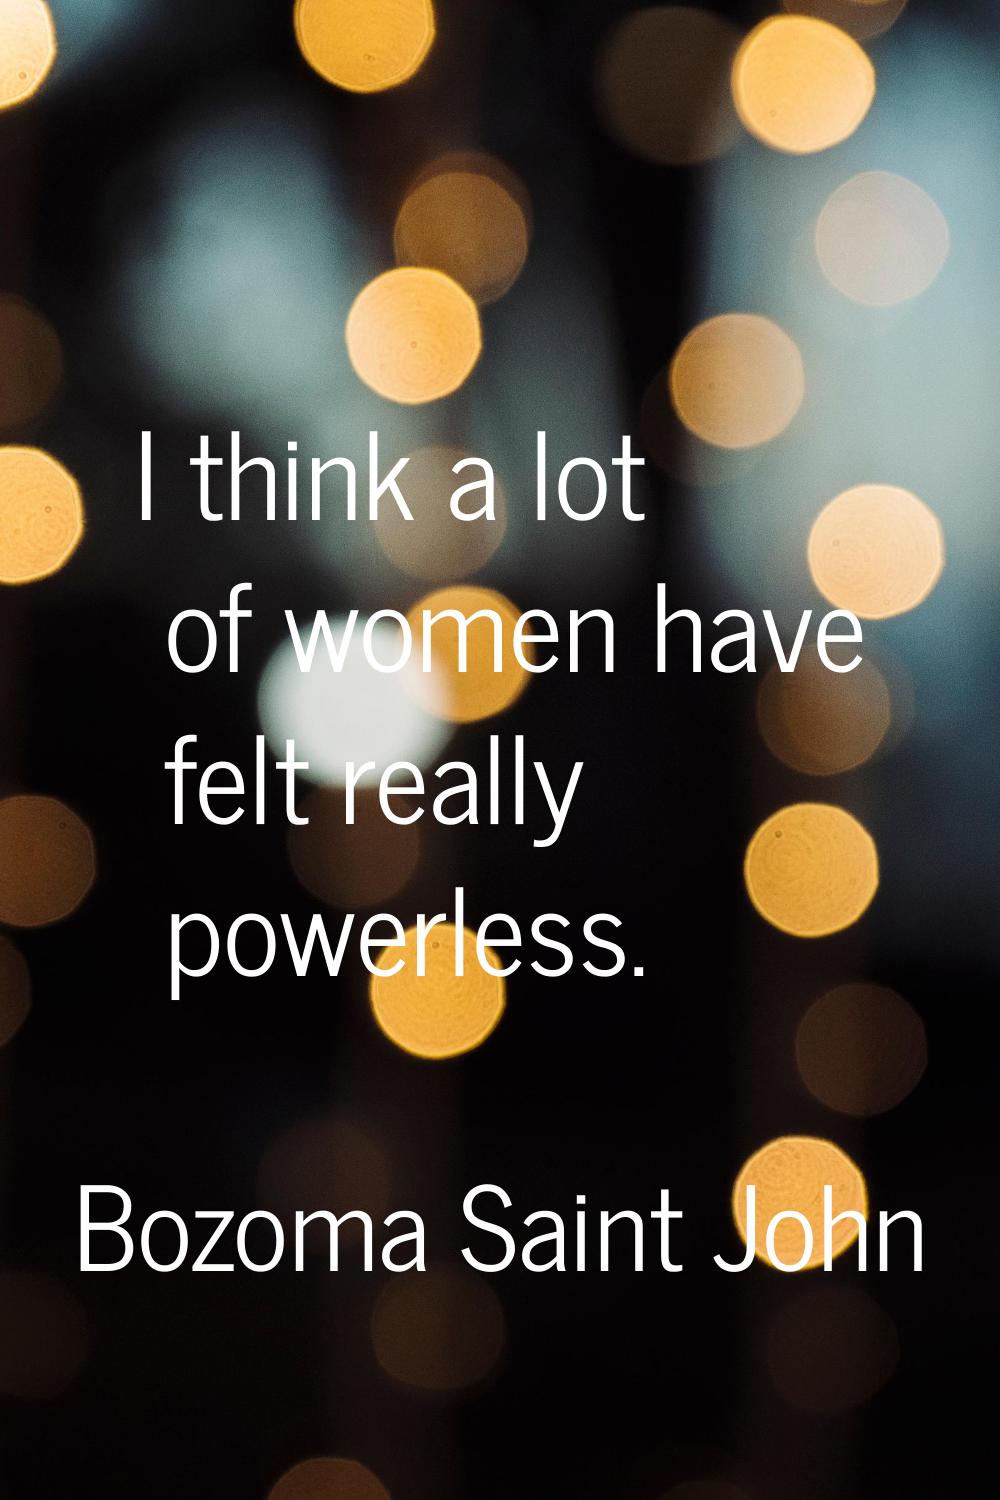 I think a lot of women have felt really powerless.